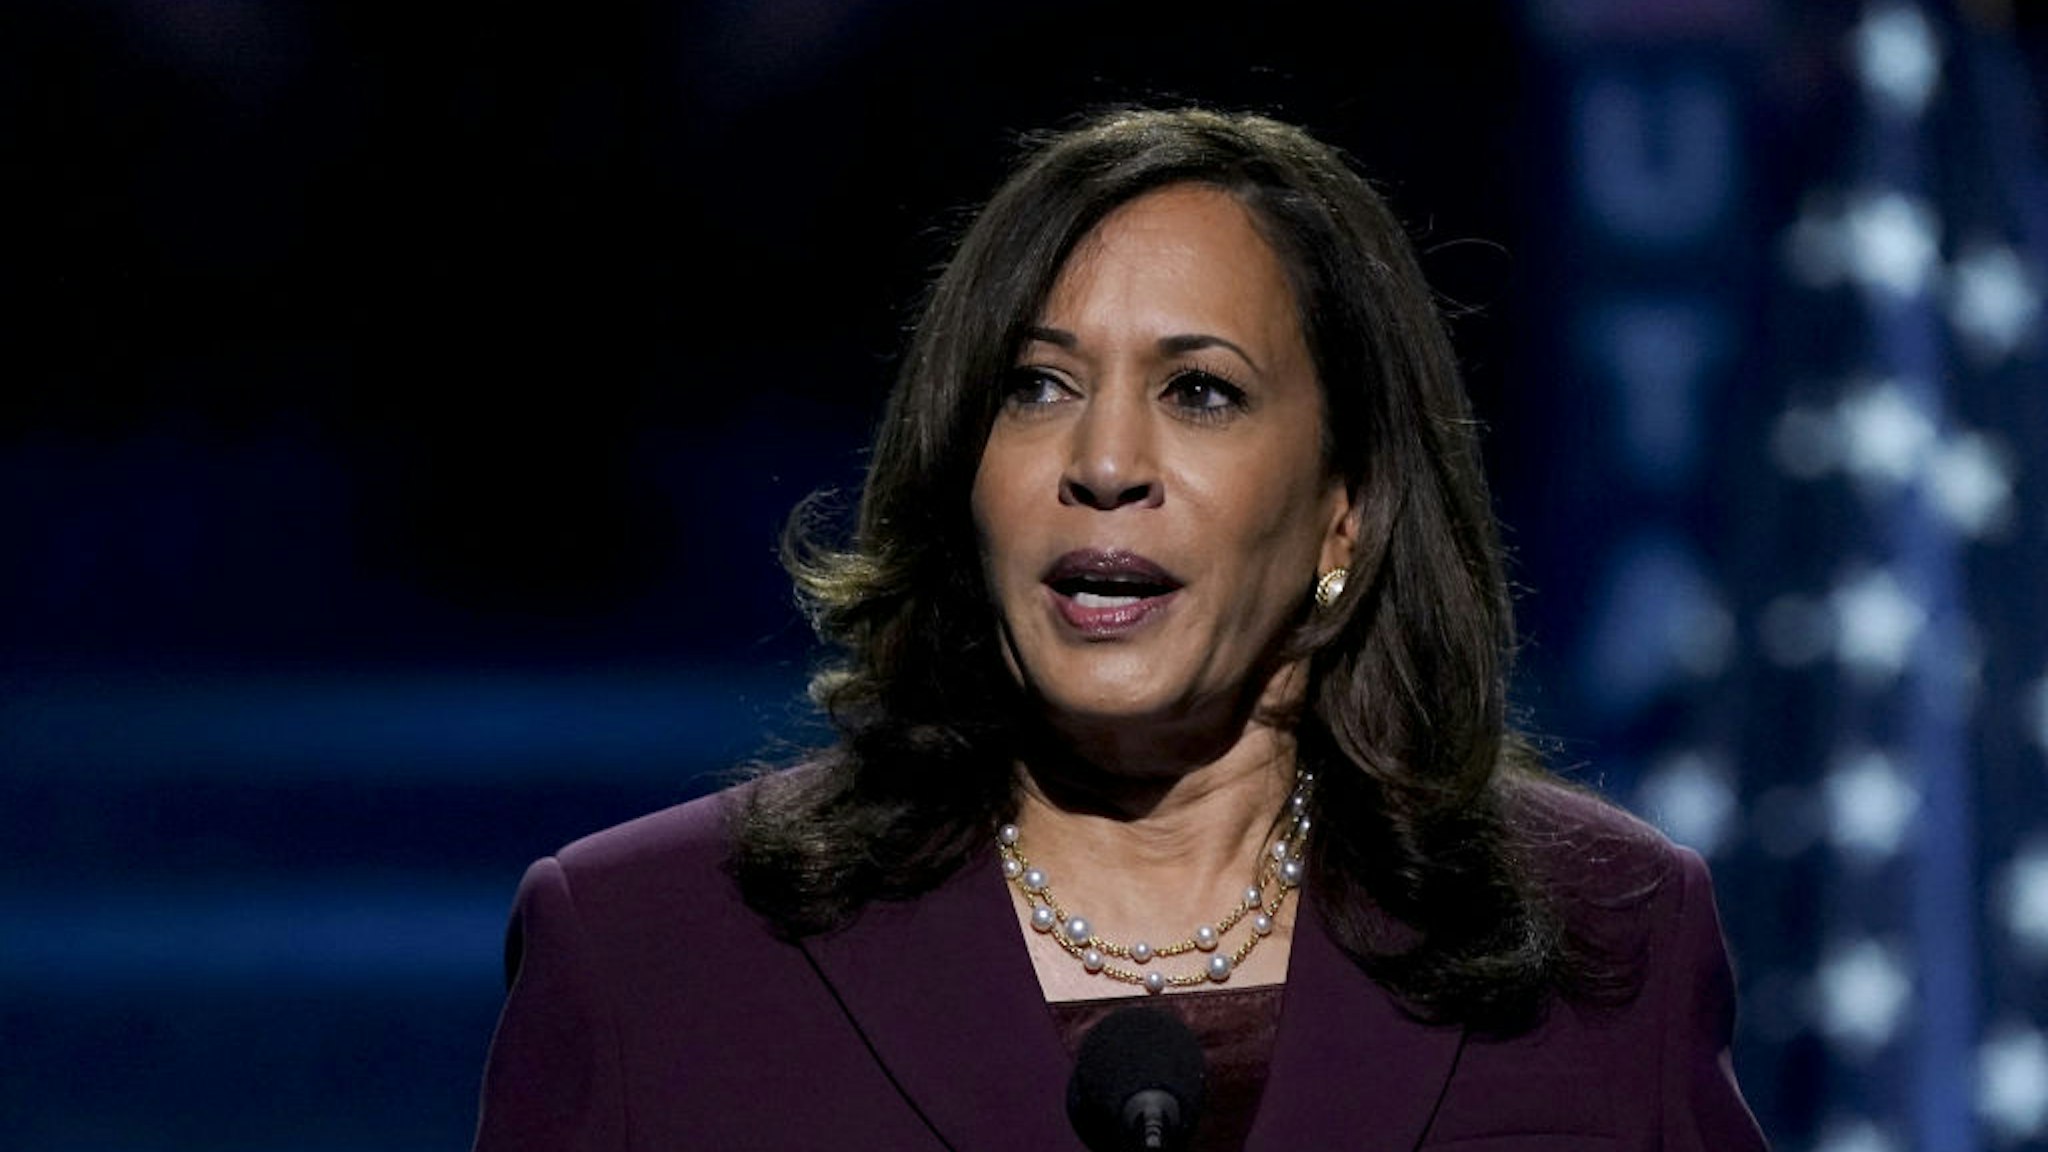 Senator Kamala Harris, Democratic vice presidential nominee, speaks during the Democratic National Convention at the Chase Center in Wilmington, Delaware, U.S., on Wednesday, Aug. 19, 2020.